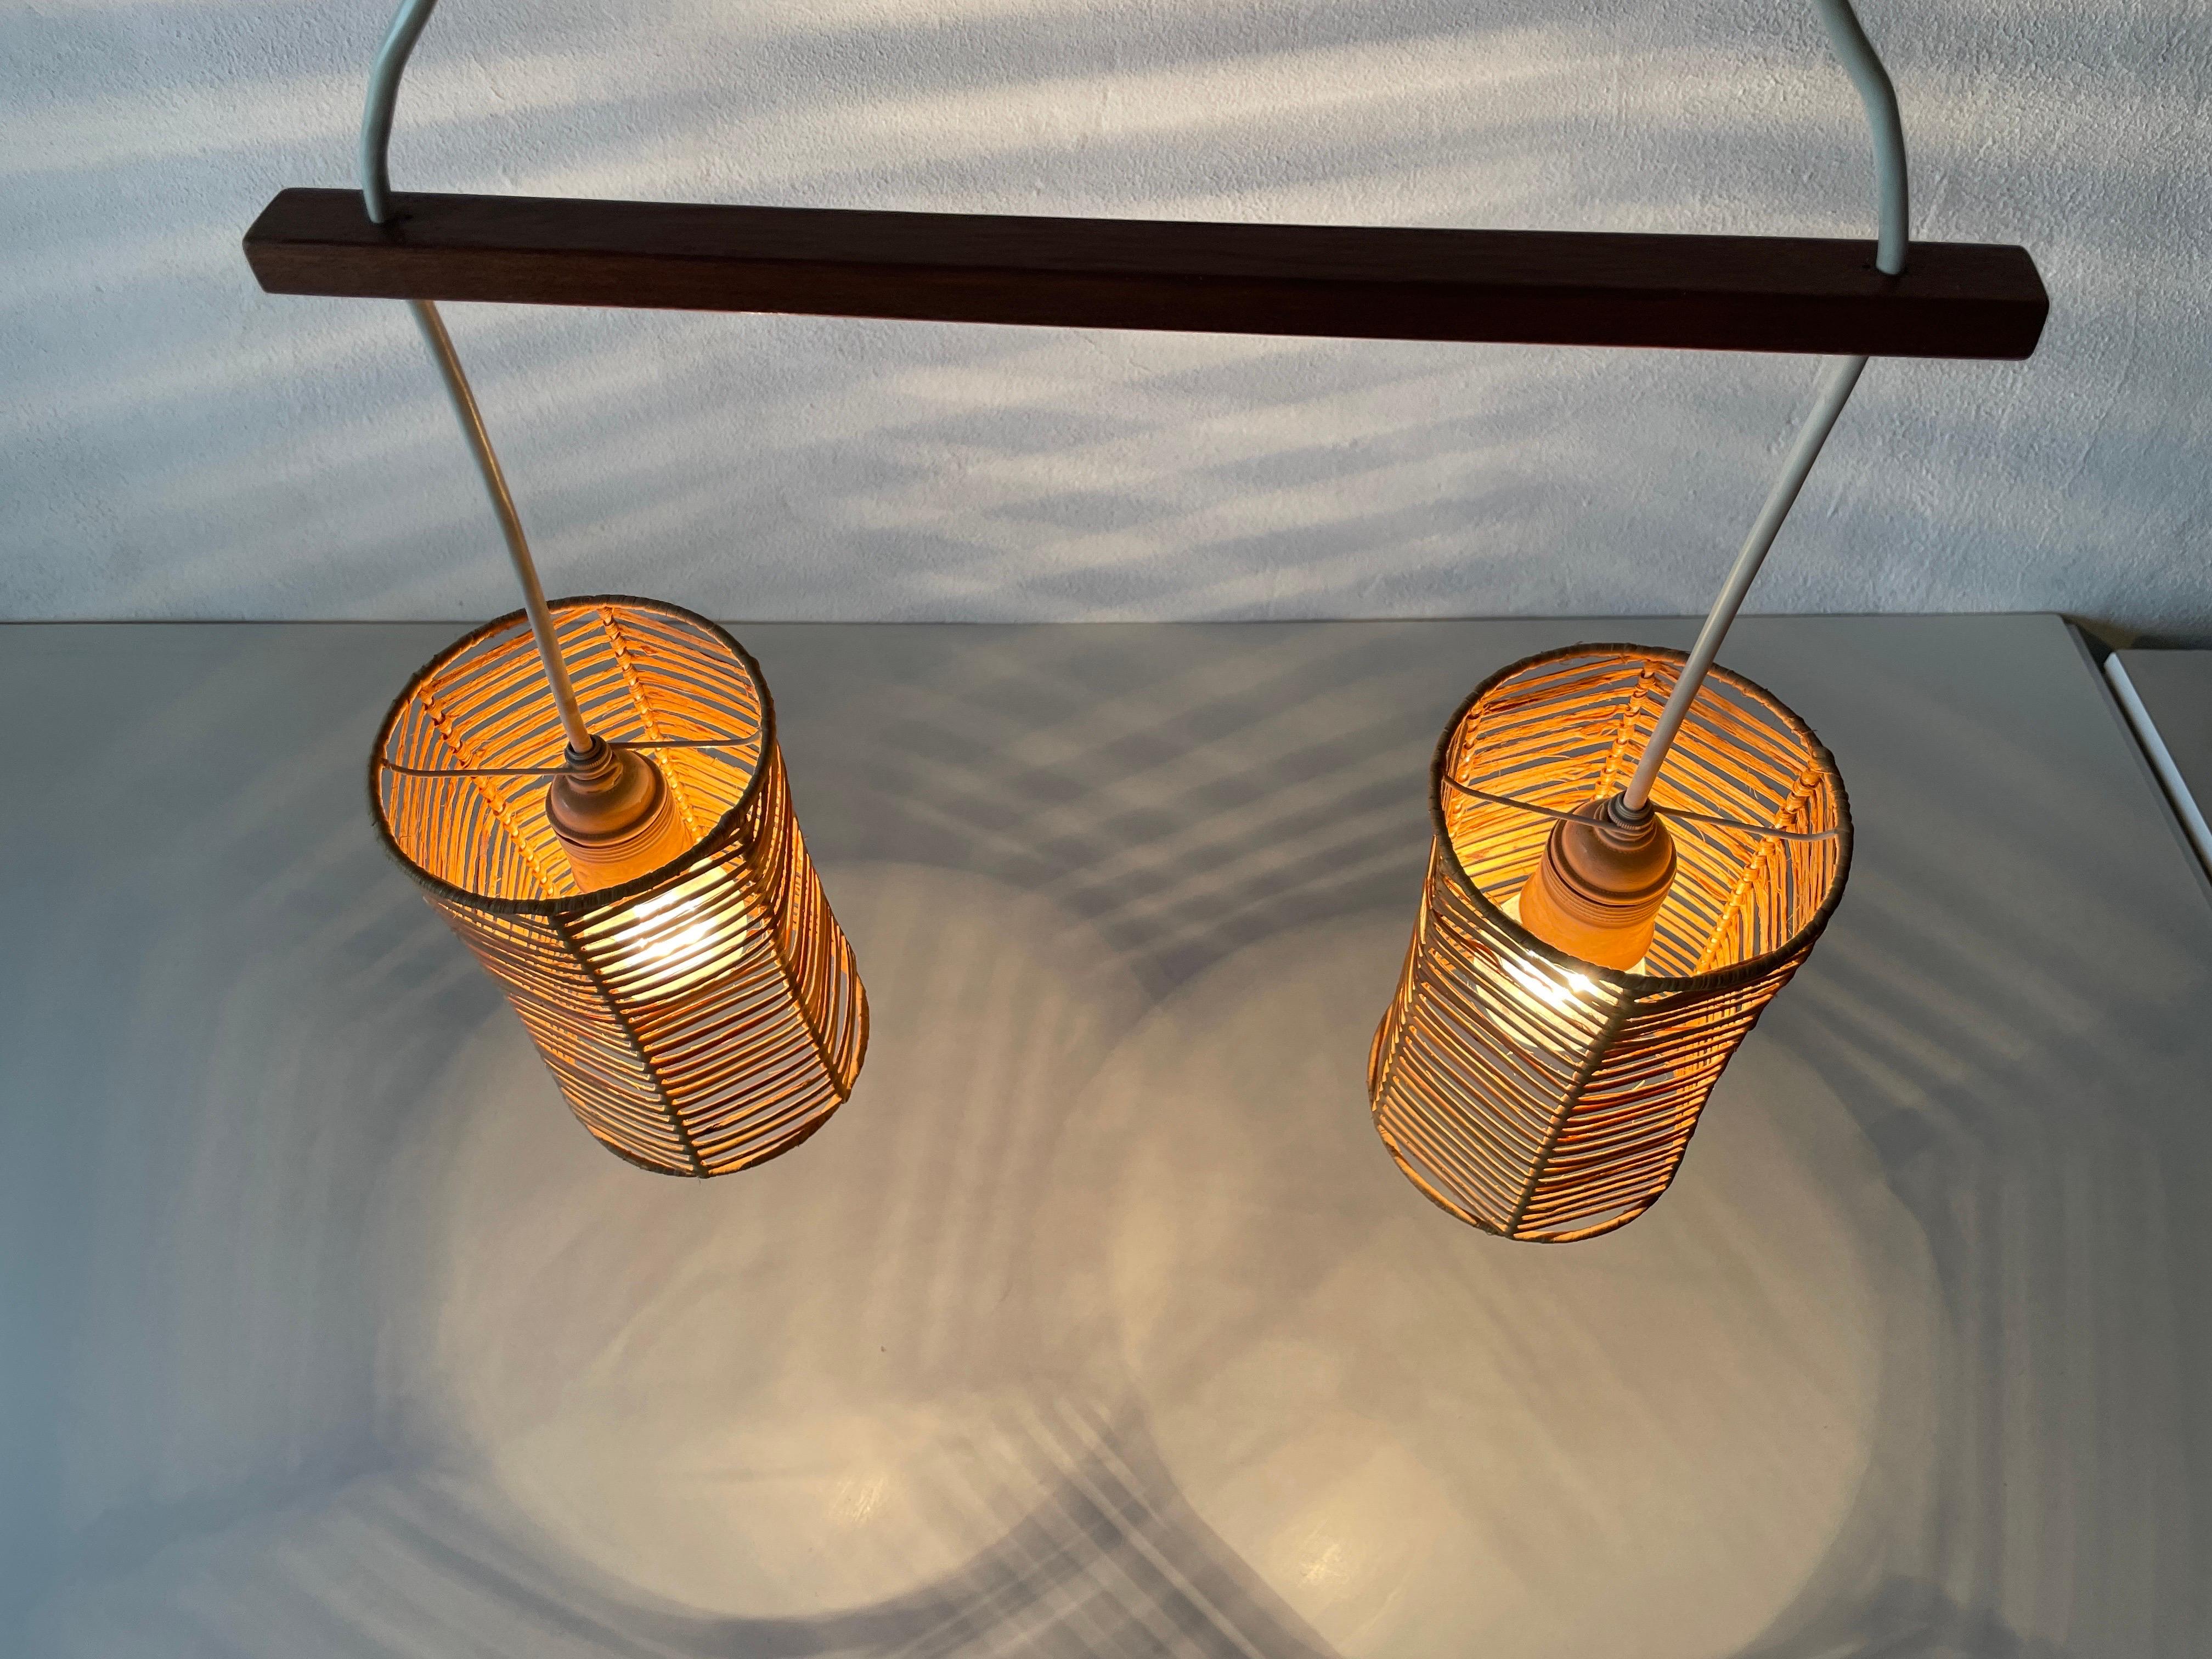 Double Shade Wicker and Wood Pendant Lamp, 1960s, Germany For Sale 7